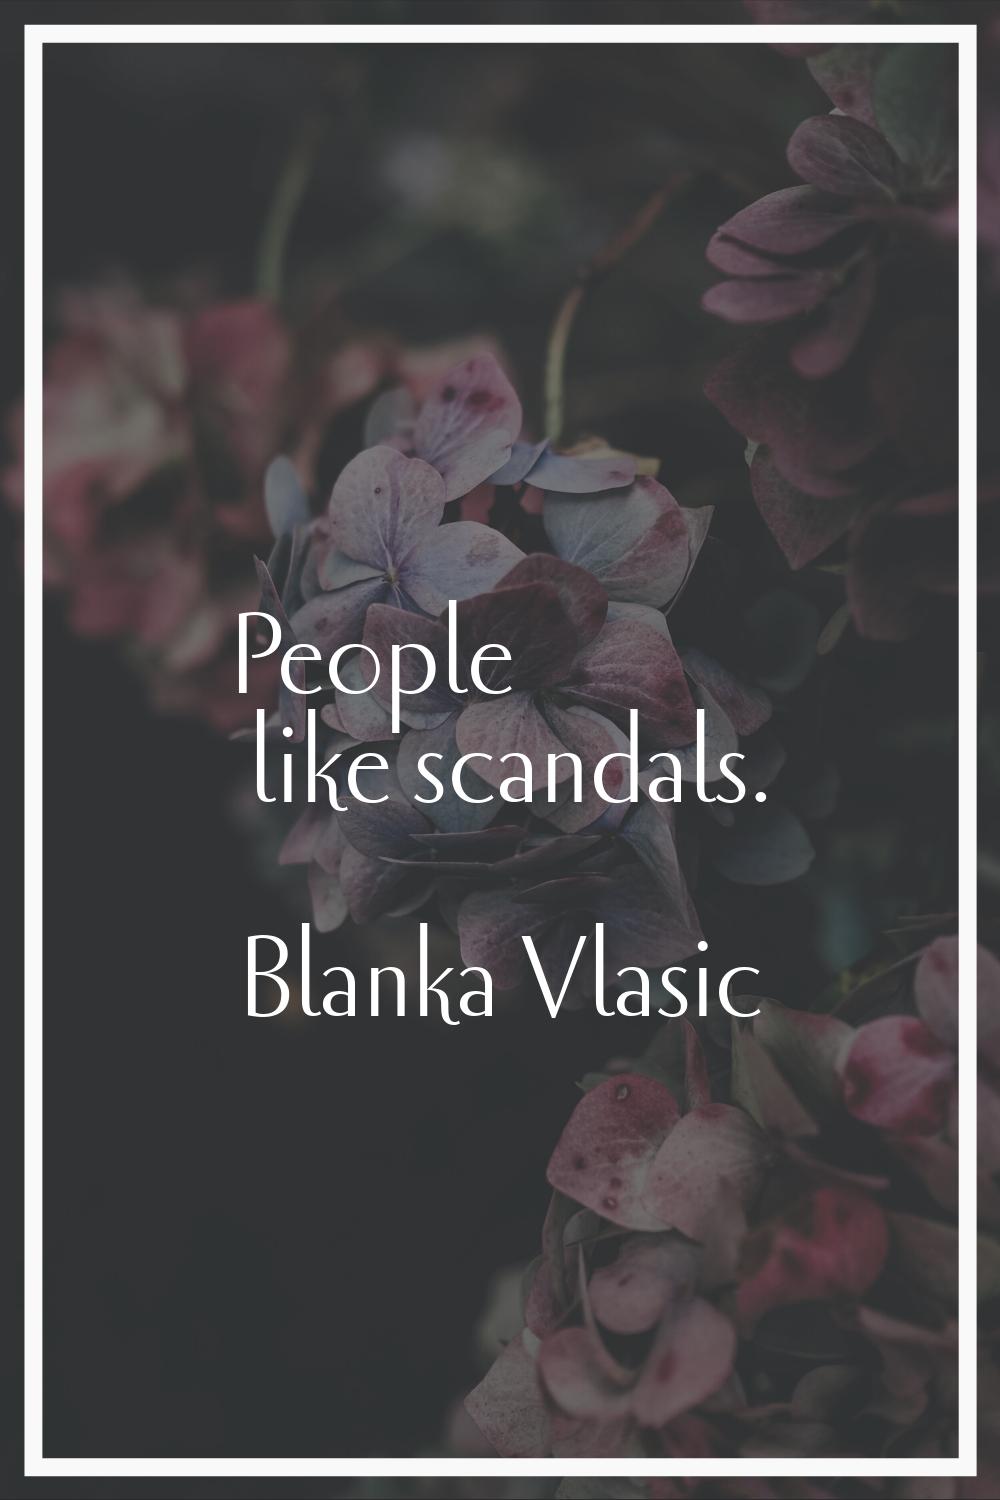 People like scandals.